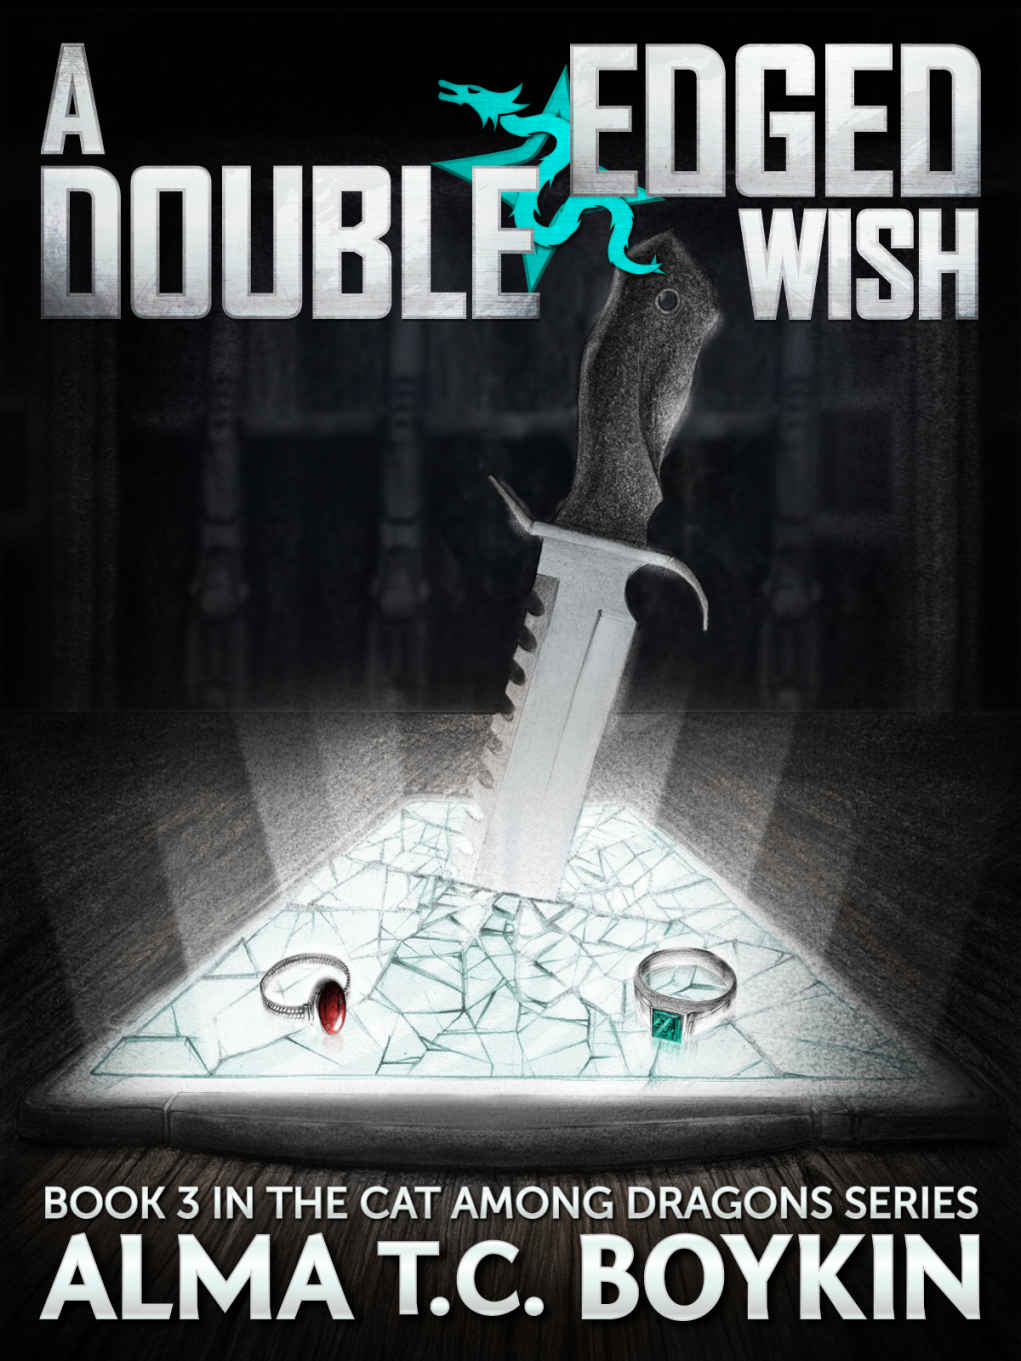 A Double Edged Wish